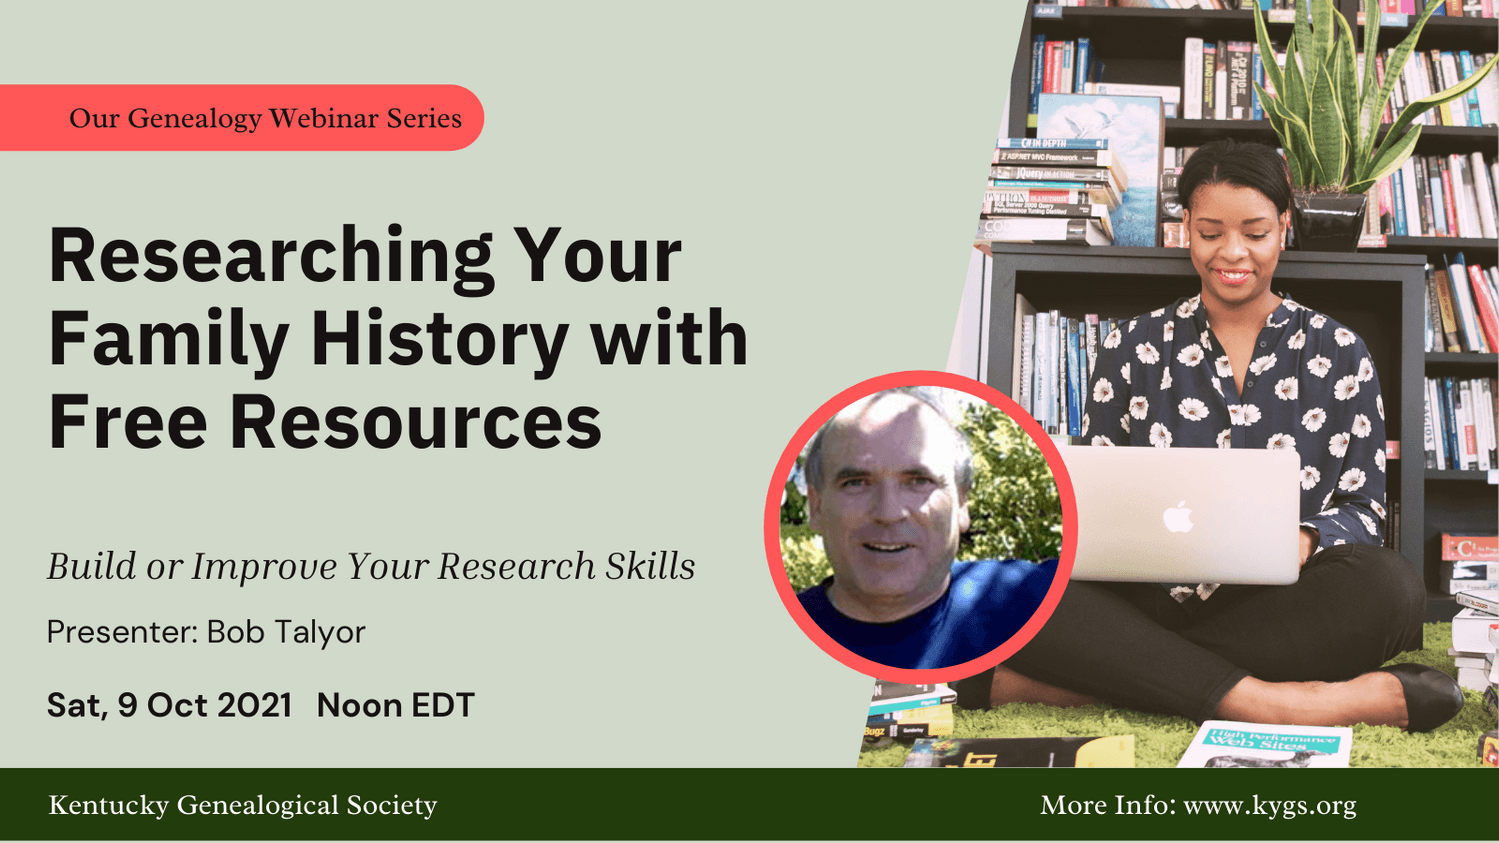 Learn How To Research Your Family History With Free Resources